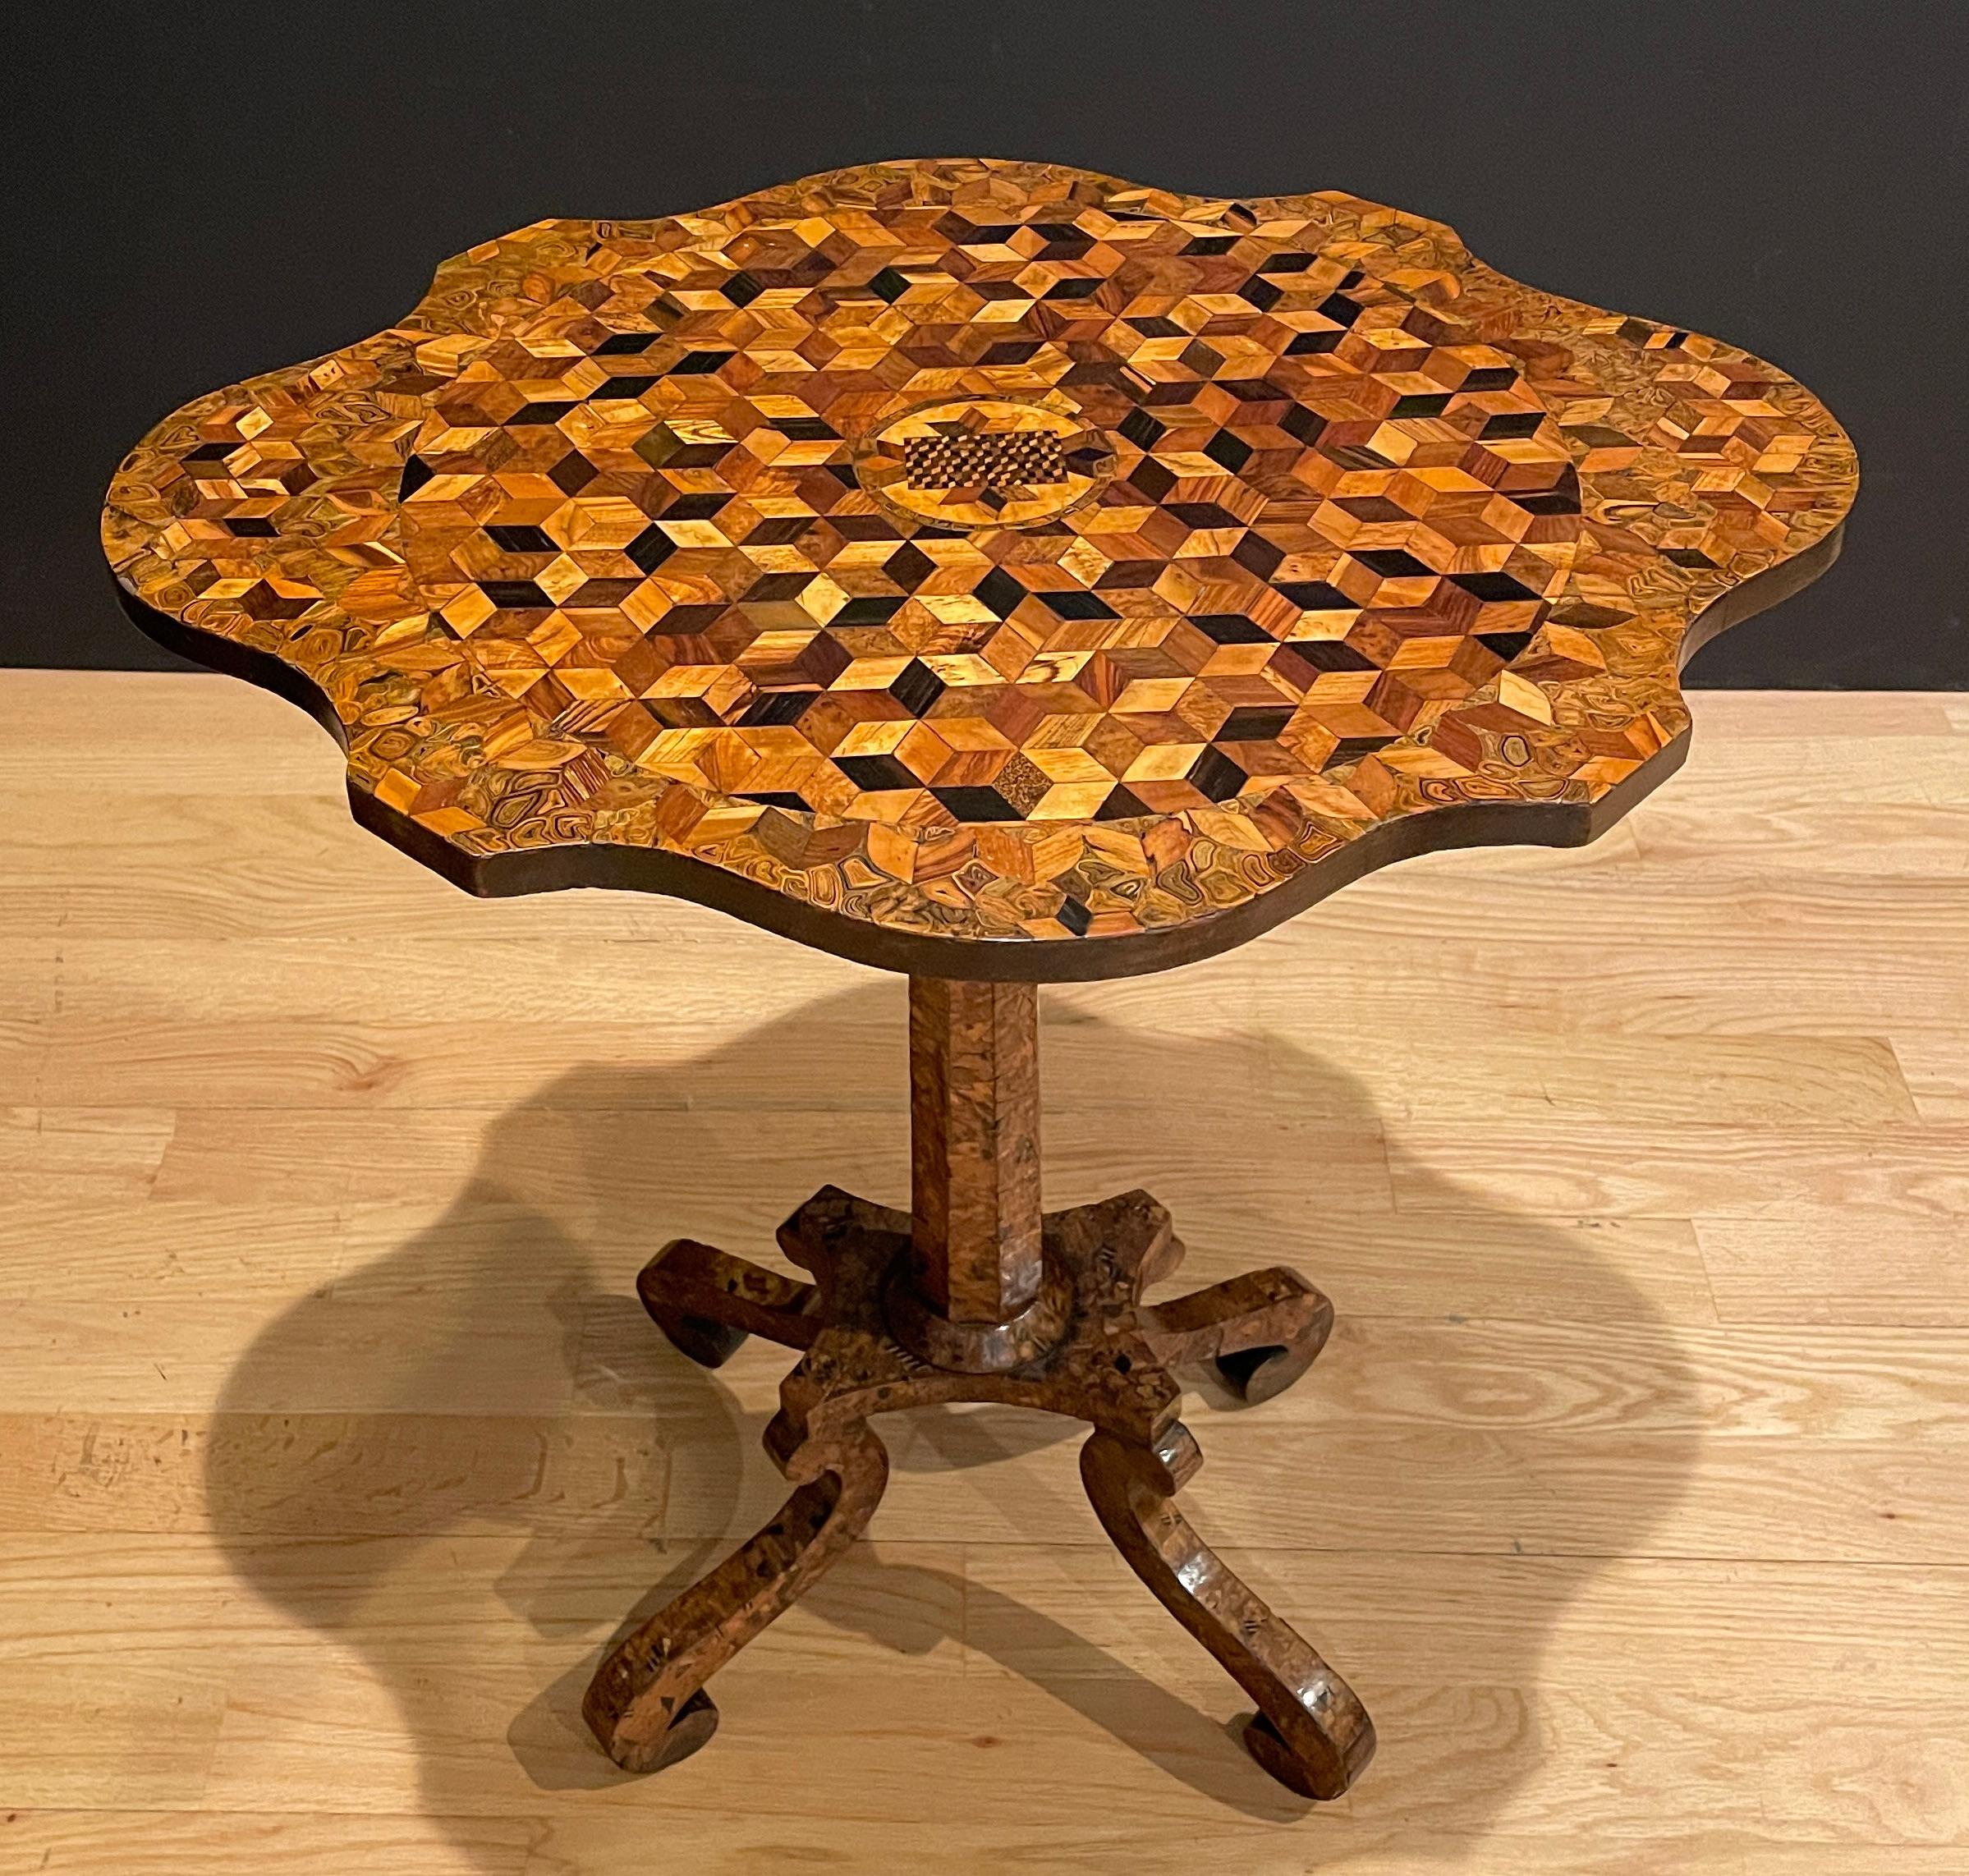 Exotic and unusual specimen wood parquetry scalloped oval pedestal table. Able to be used as a petite center table, candle stand /wine stand or side table. Four legs and tapered column supporting a beautiful and visually 3-dimensional specimen wood